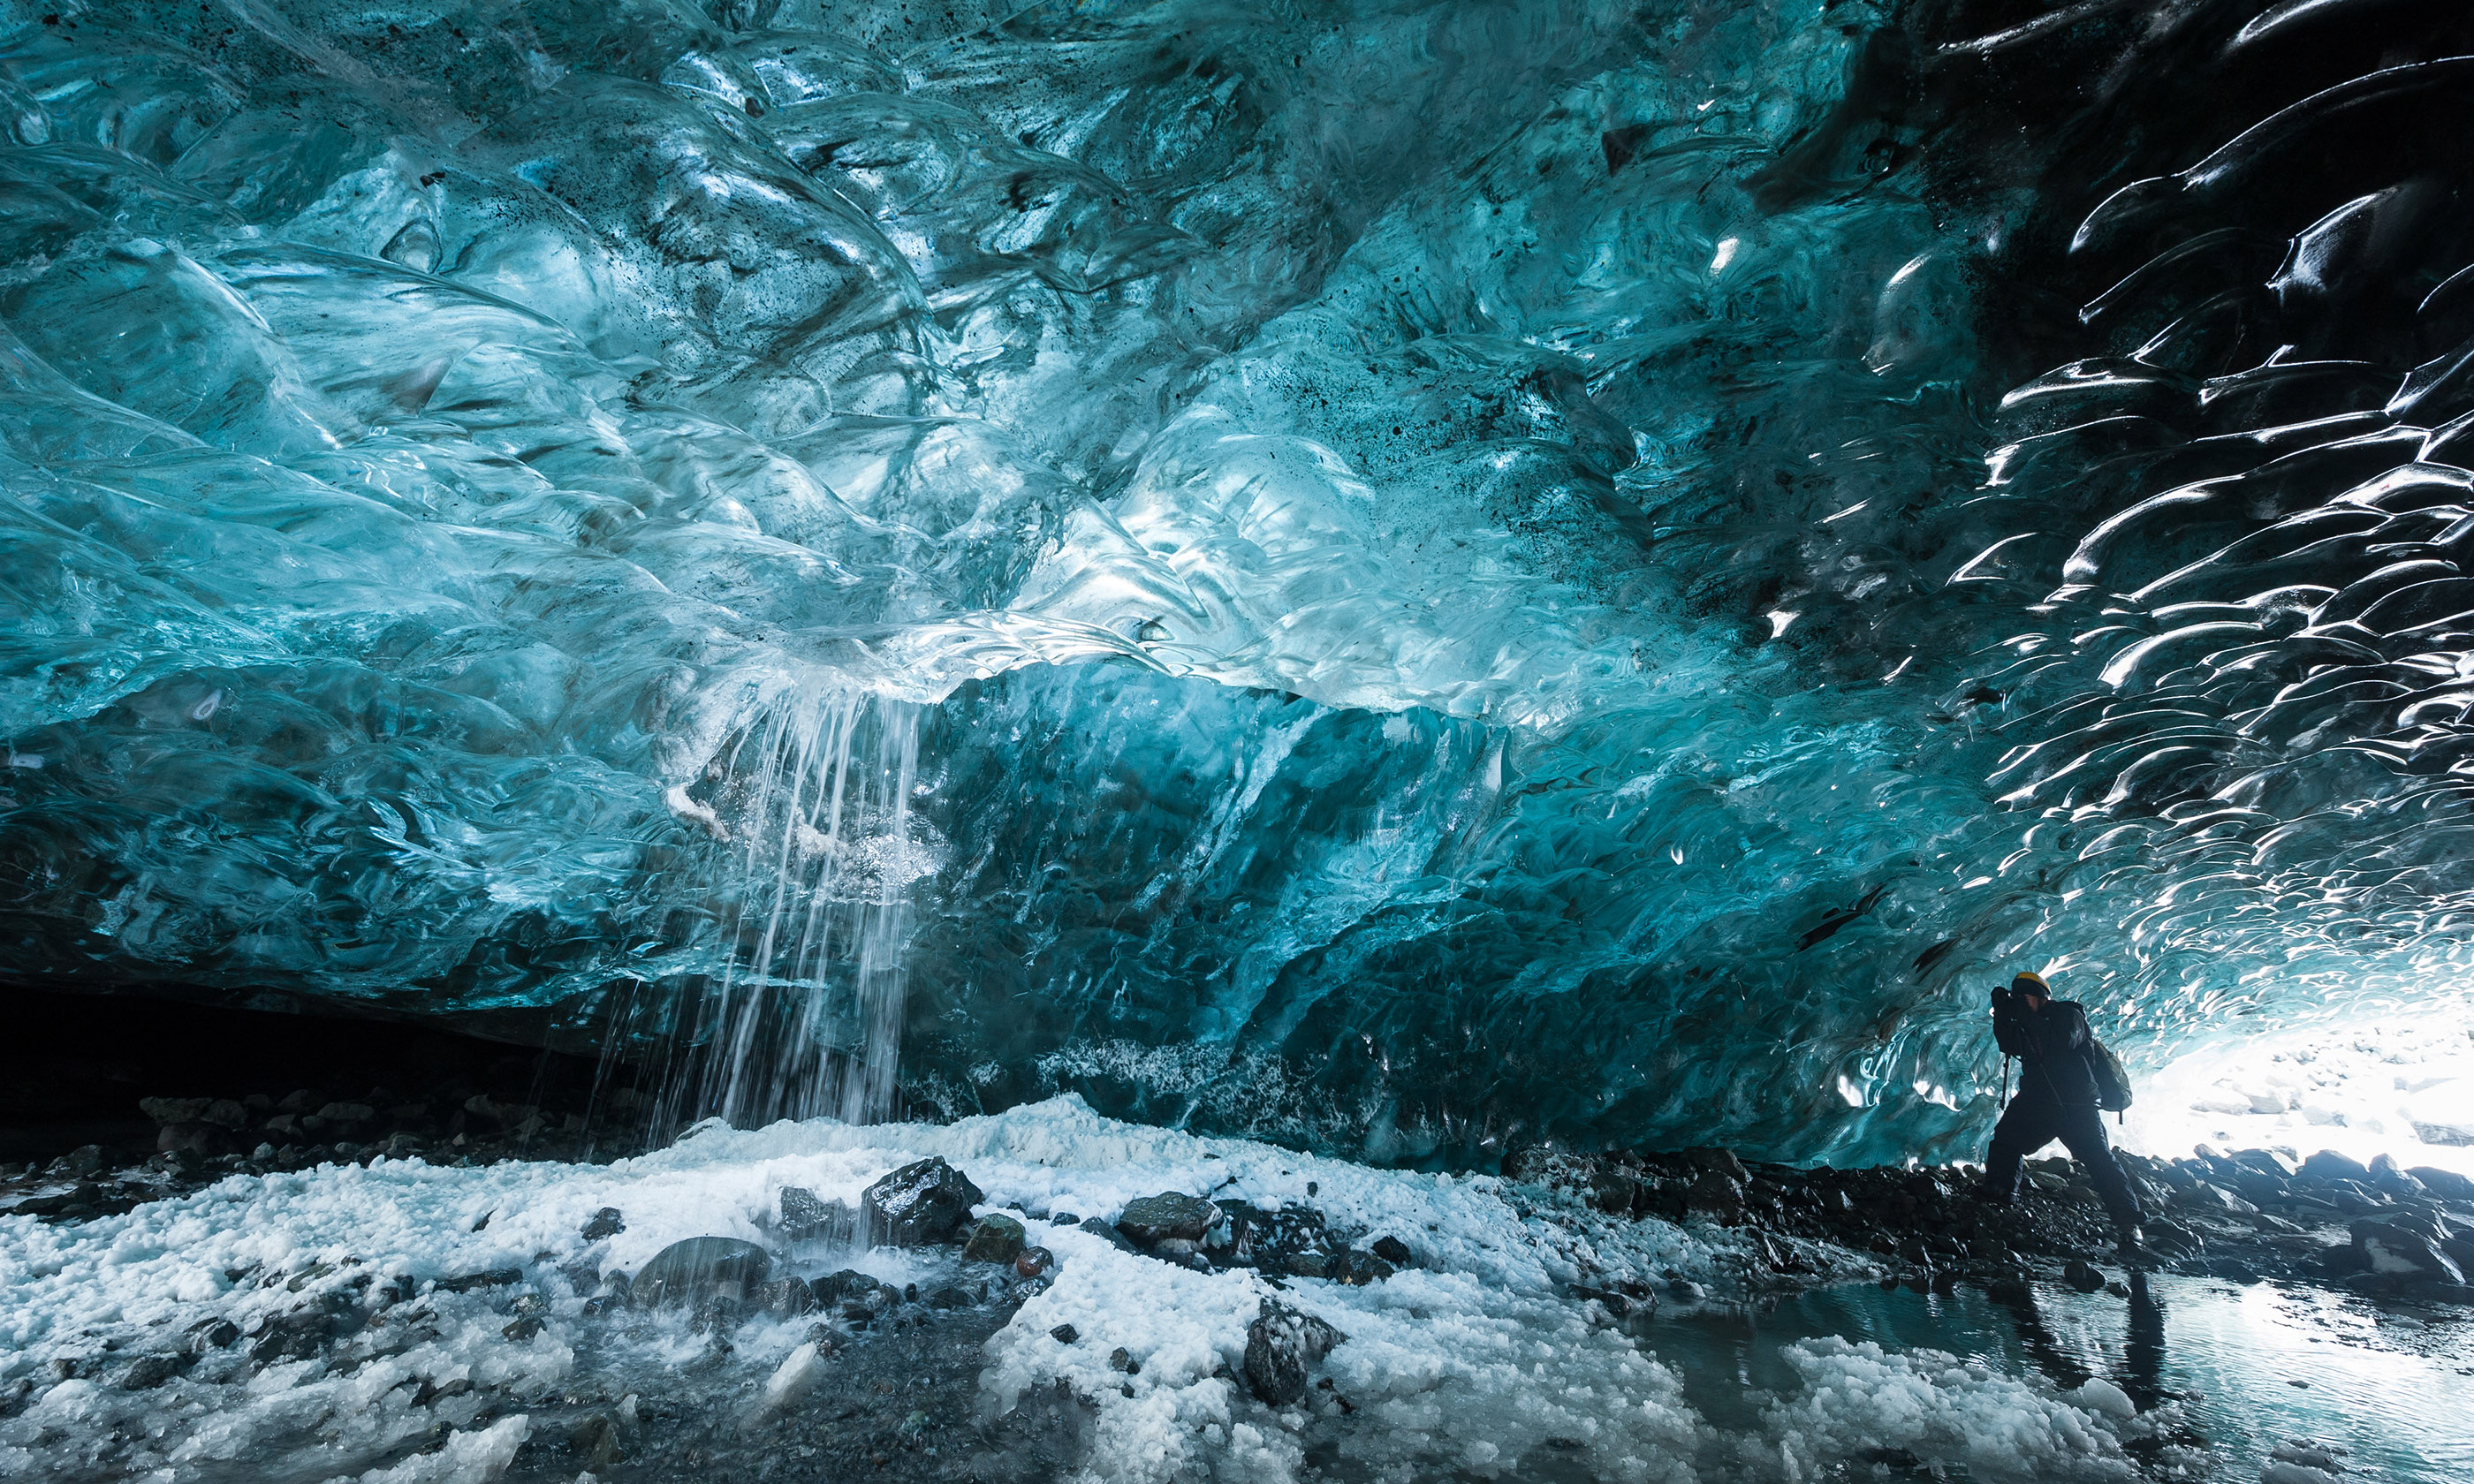 Ice cave in Iceland (Shutterstock: see credit below)